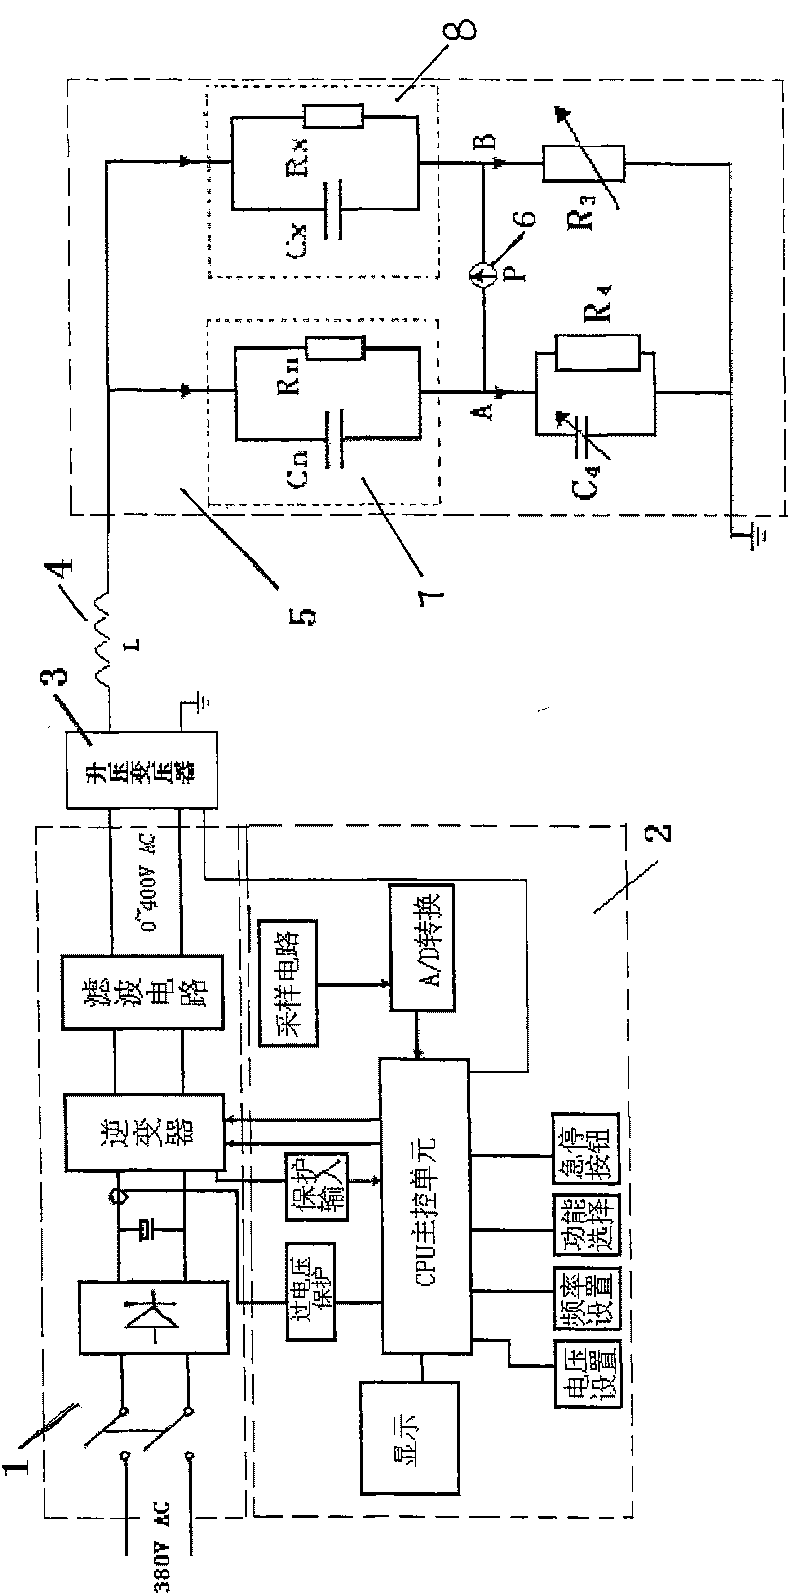 Device and method for testing dielectric loss of high voltage transformer